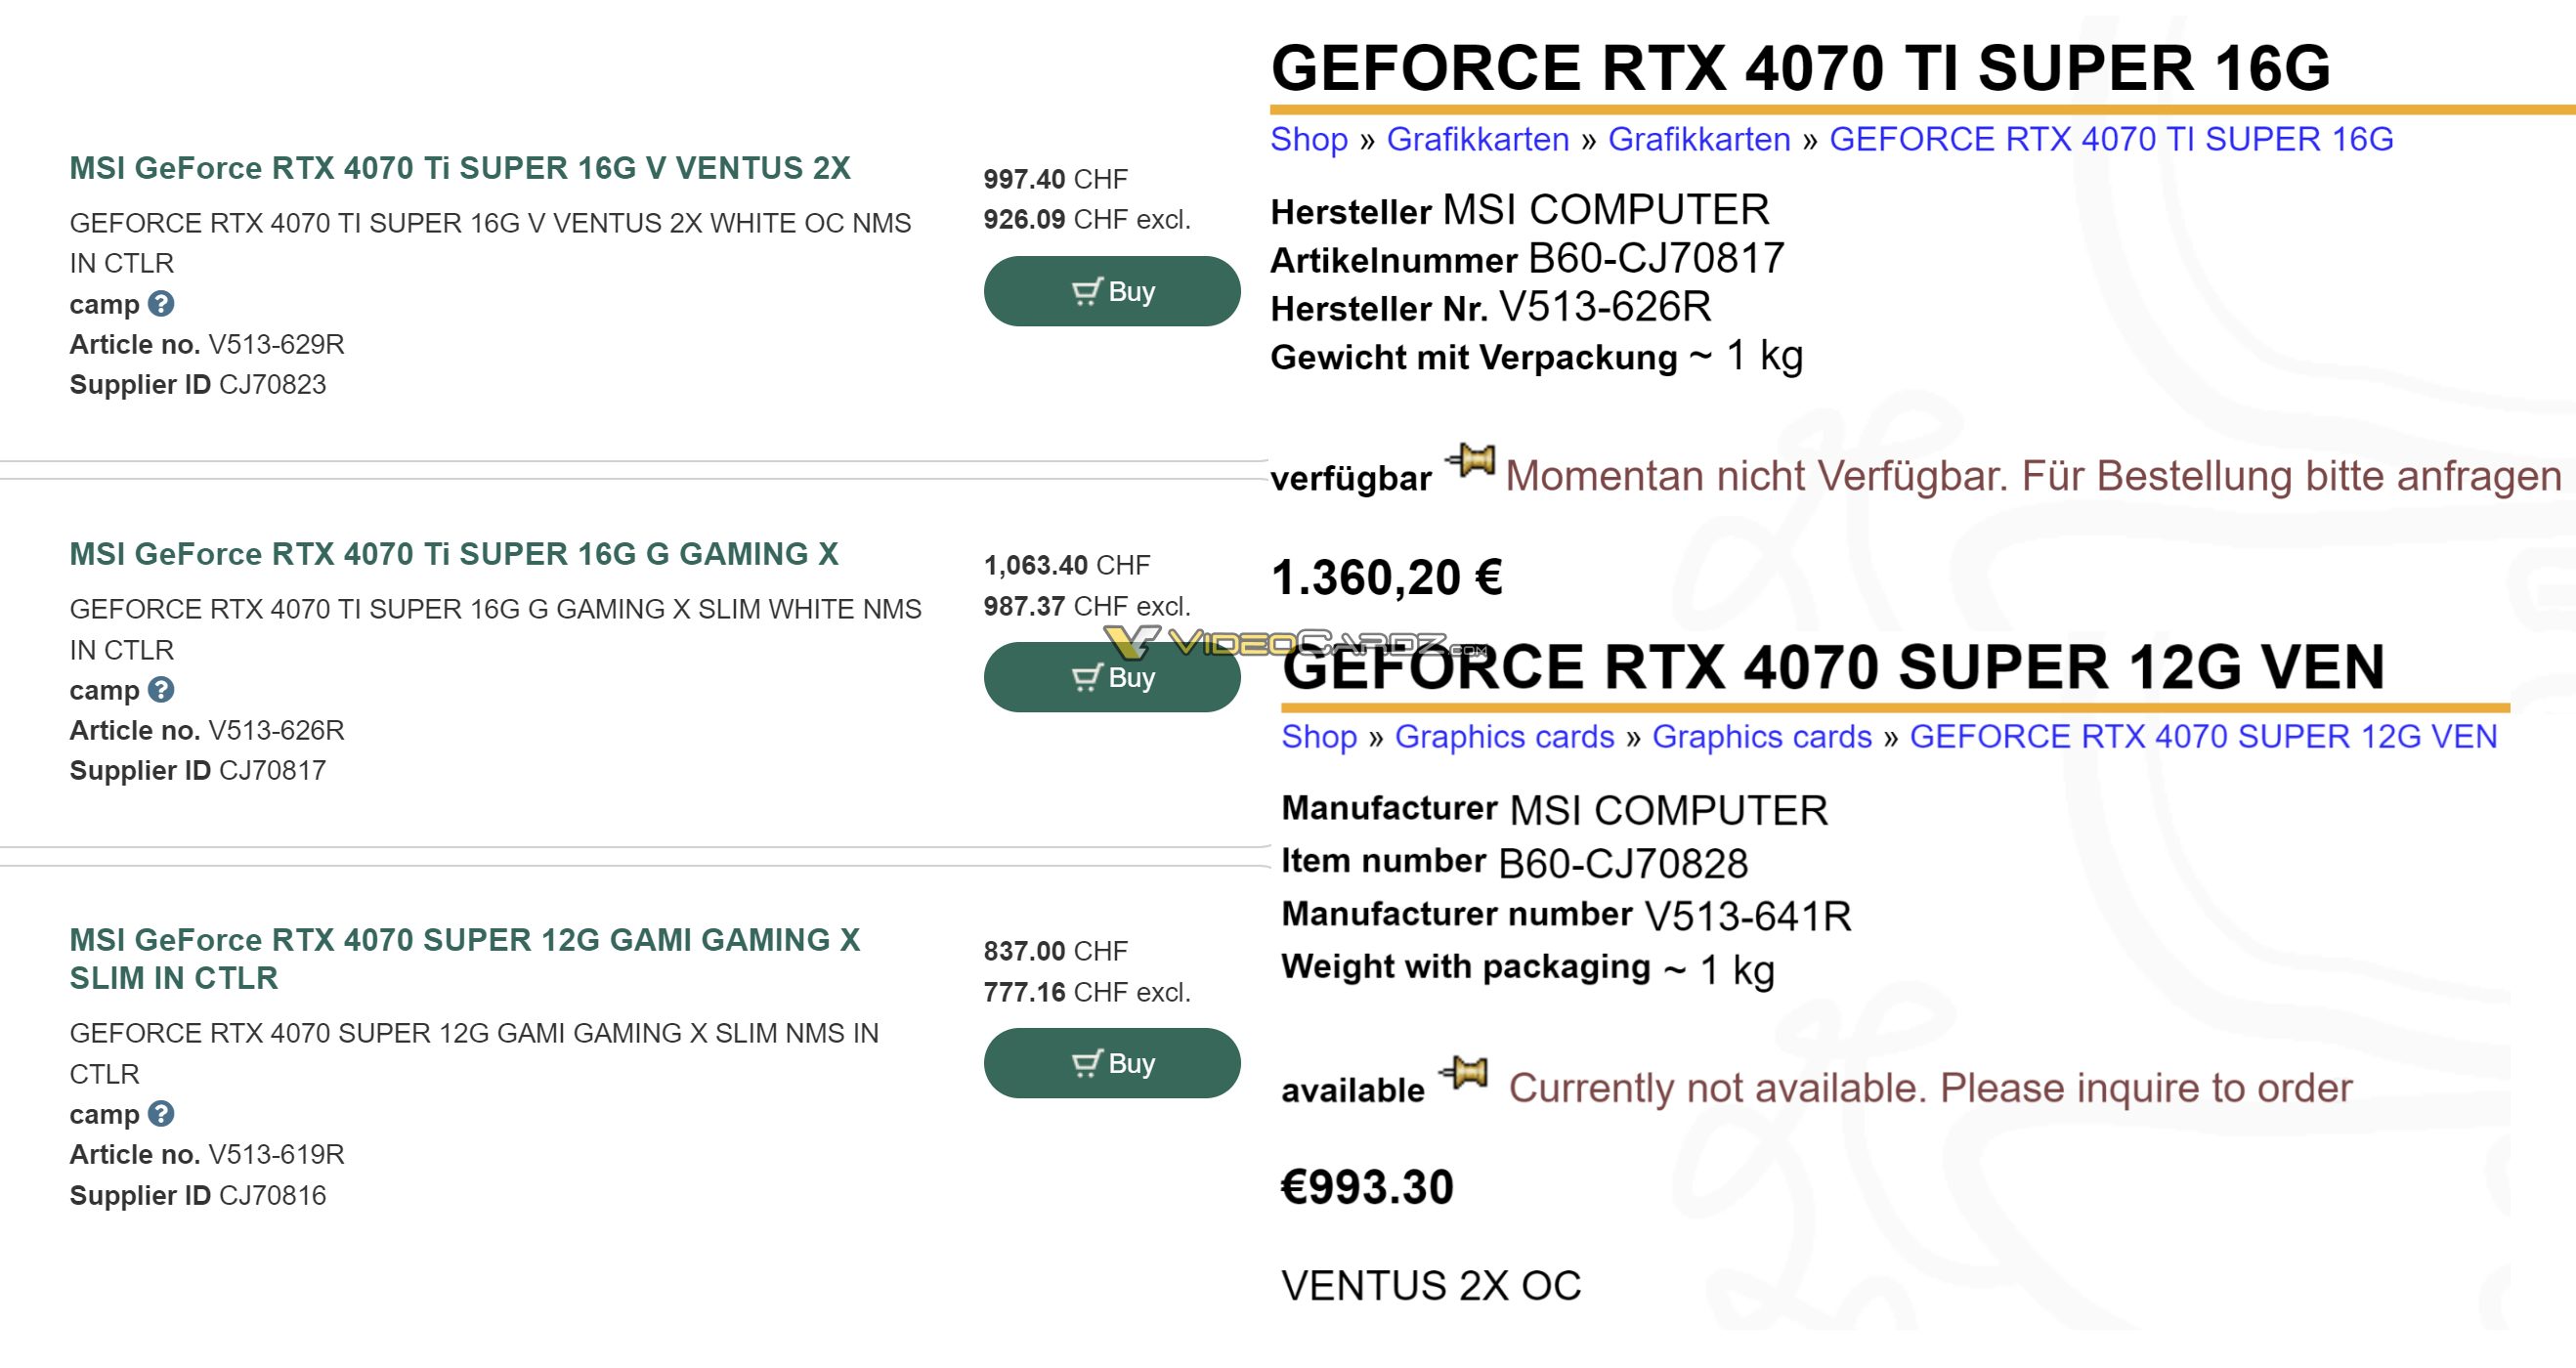 Nvidia did the unthinkable with the RTX 4080 Super